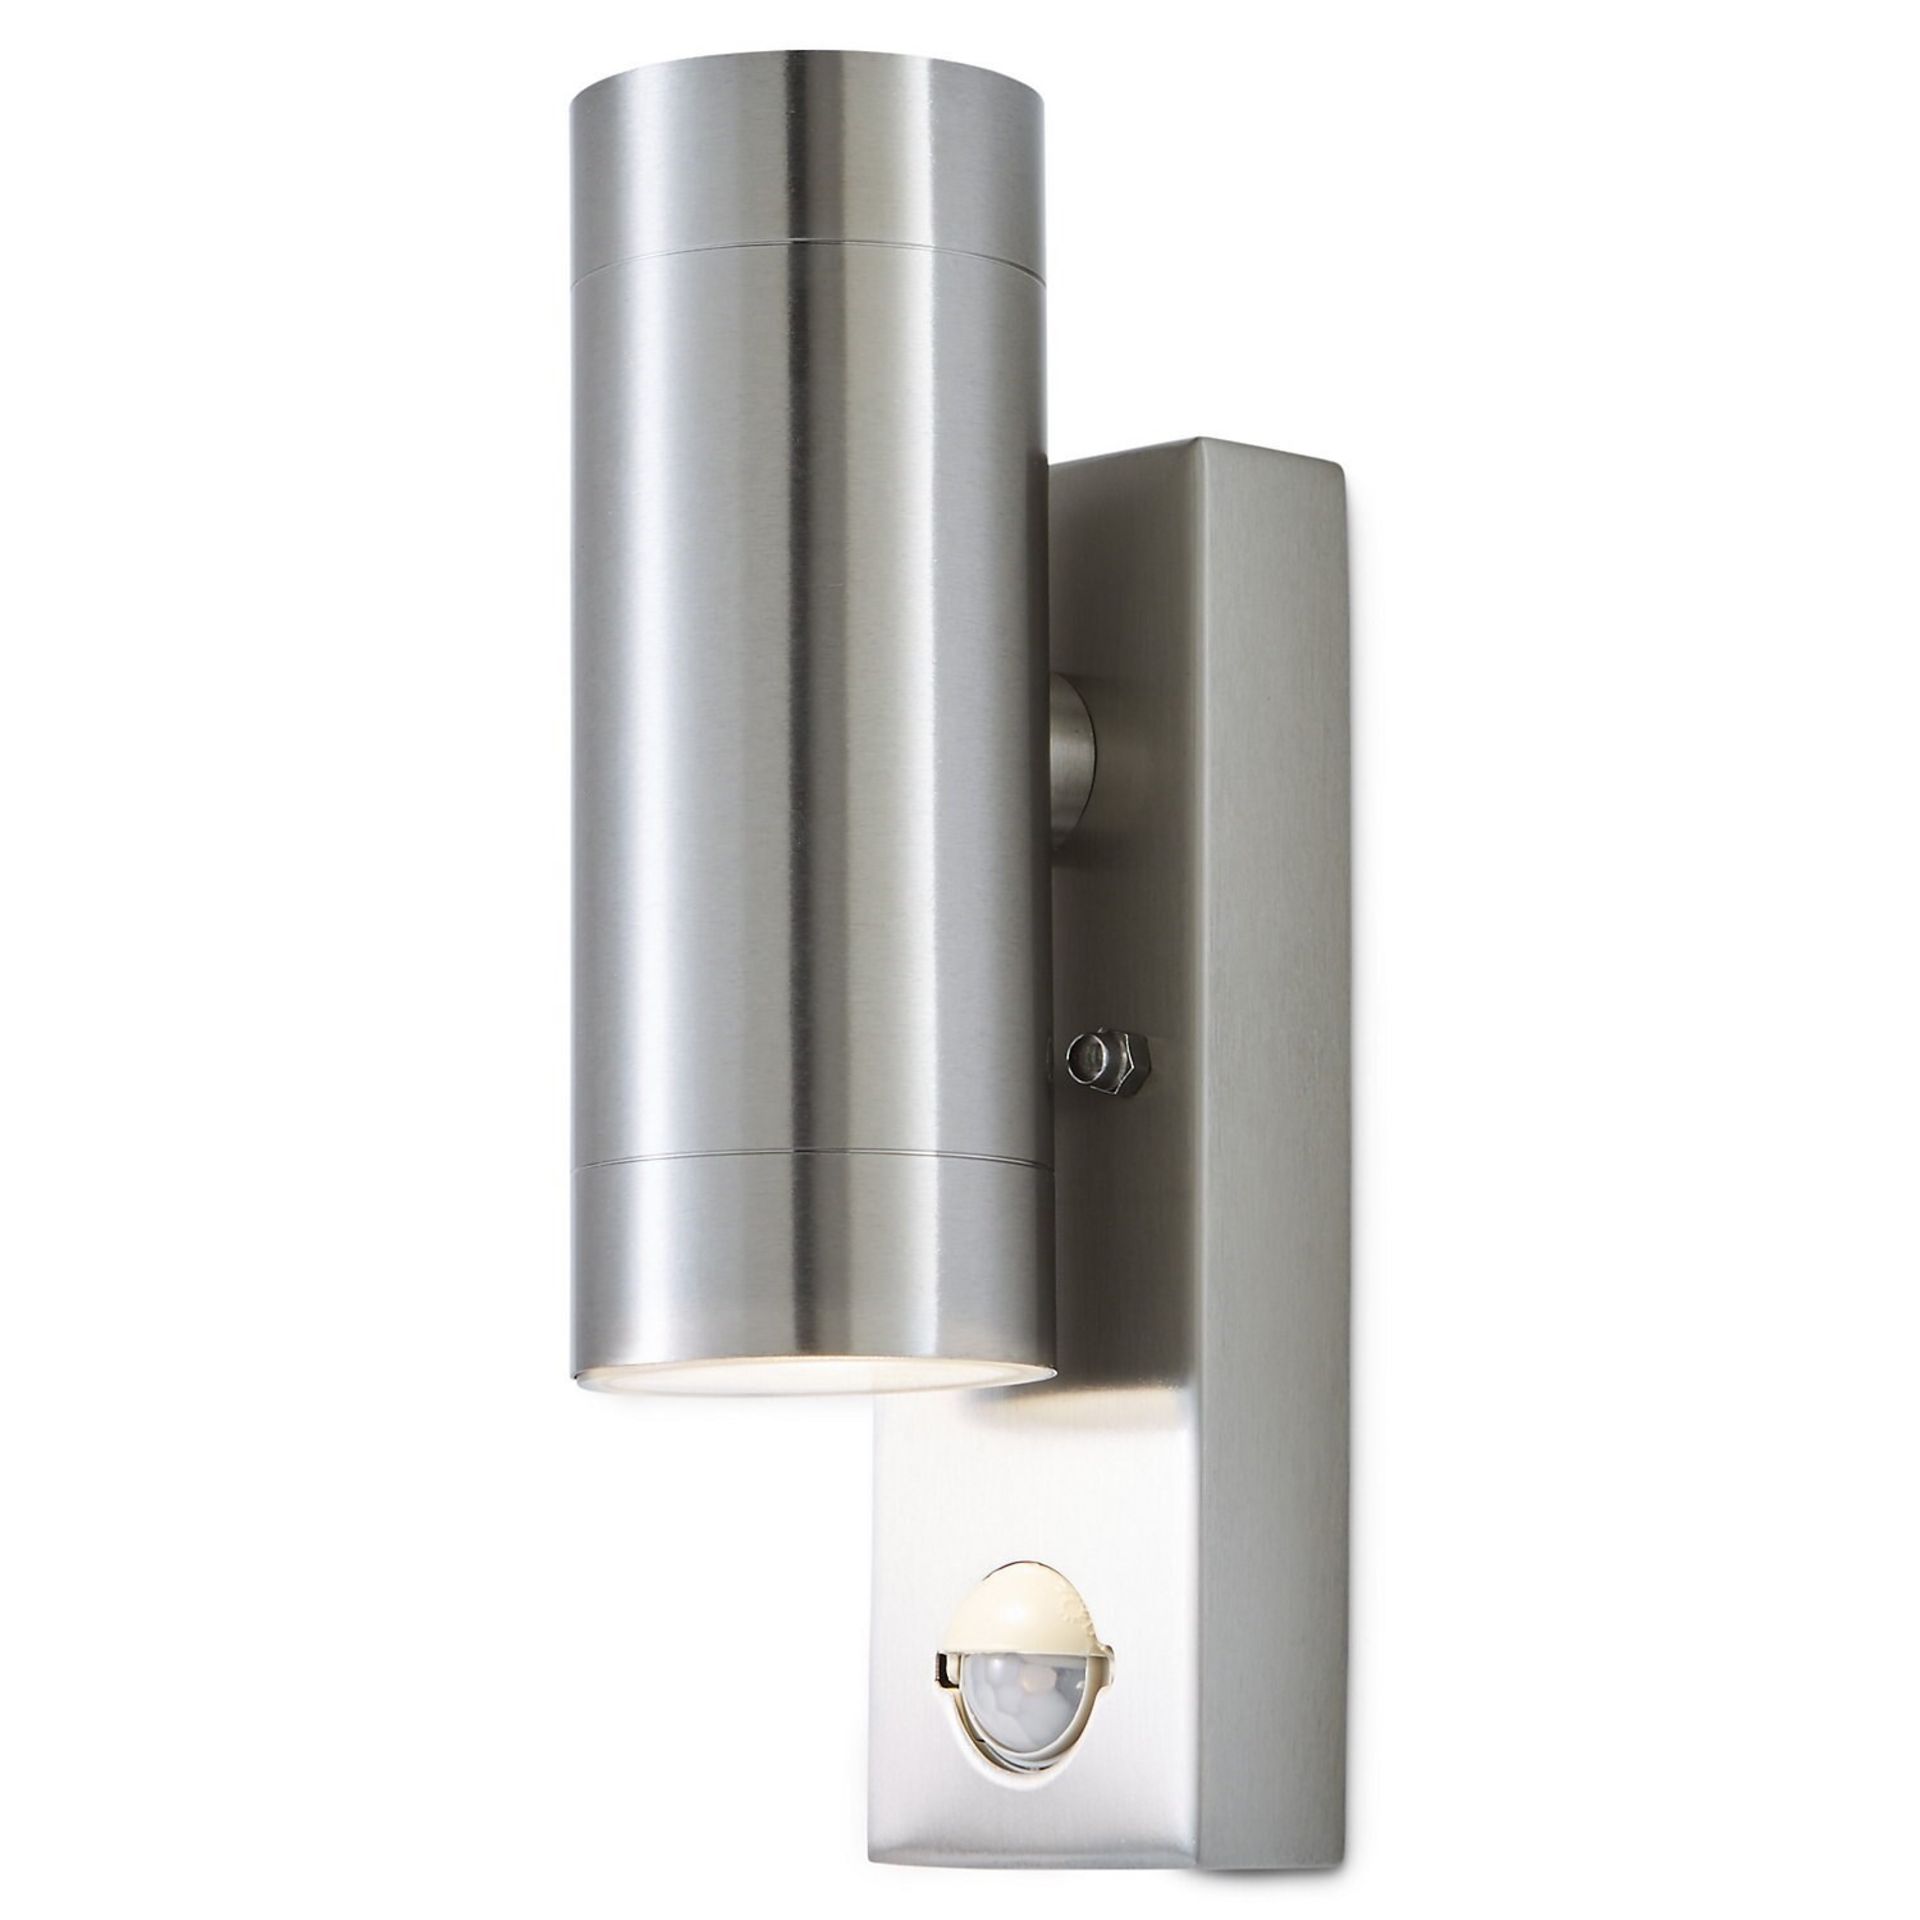 (HM147) Blooma Candiac Silver effect LED PIR Motion sensor Outdoor Wall light You can install t...